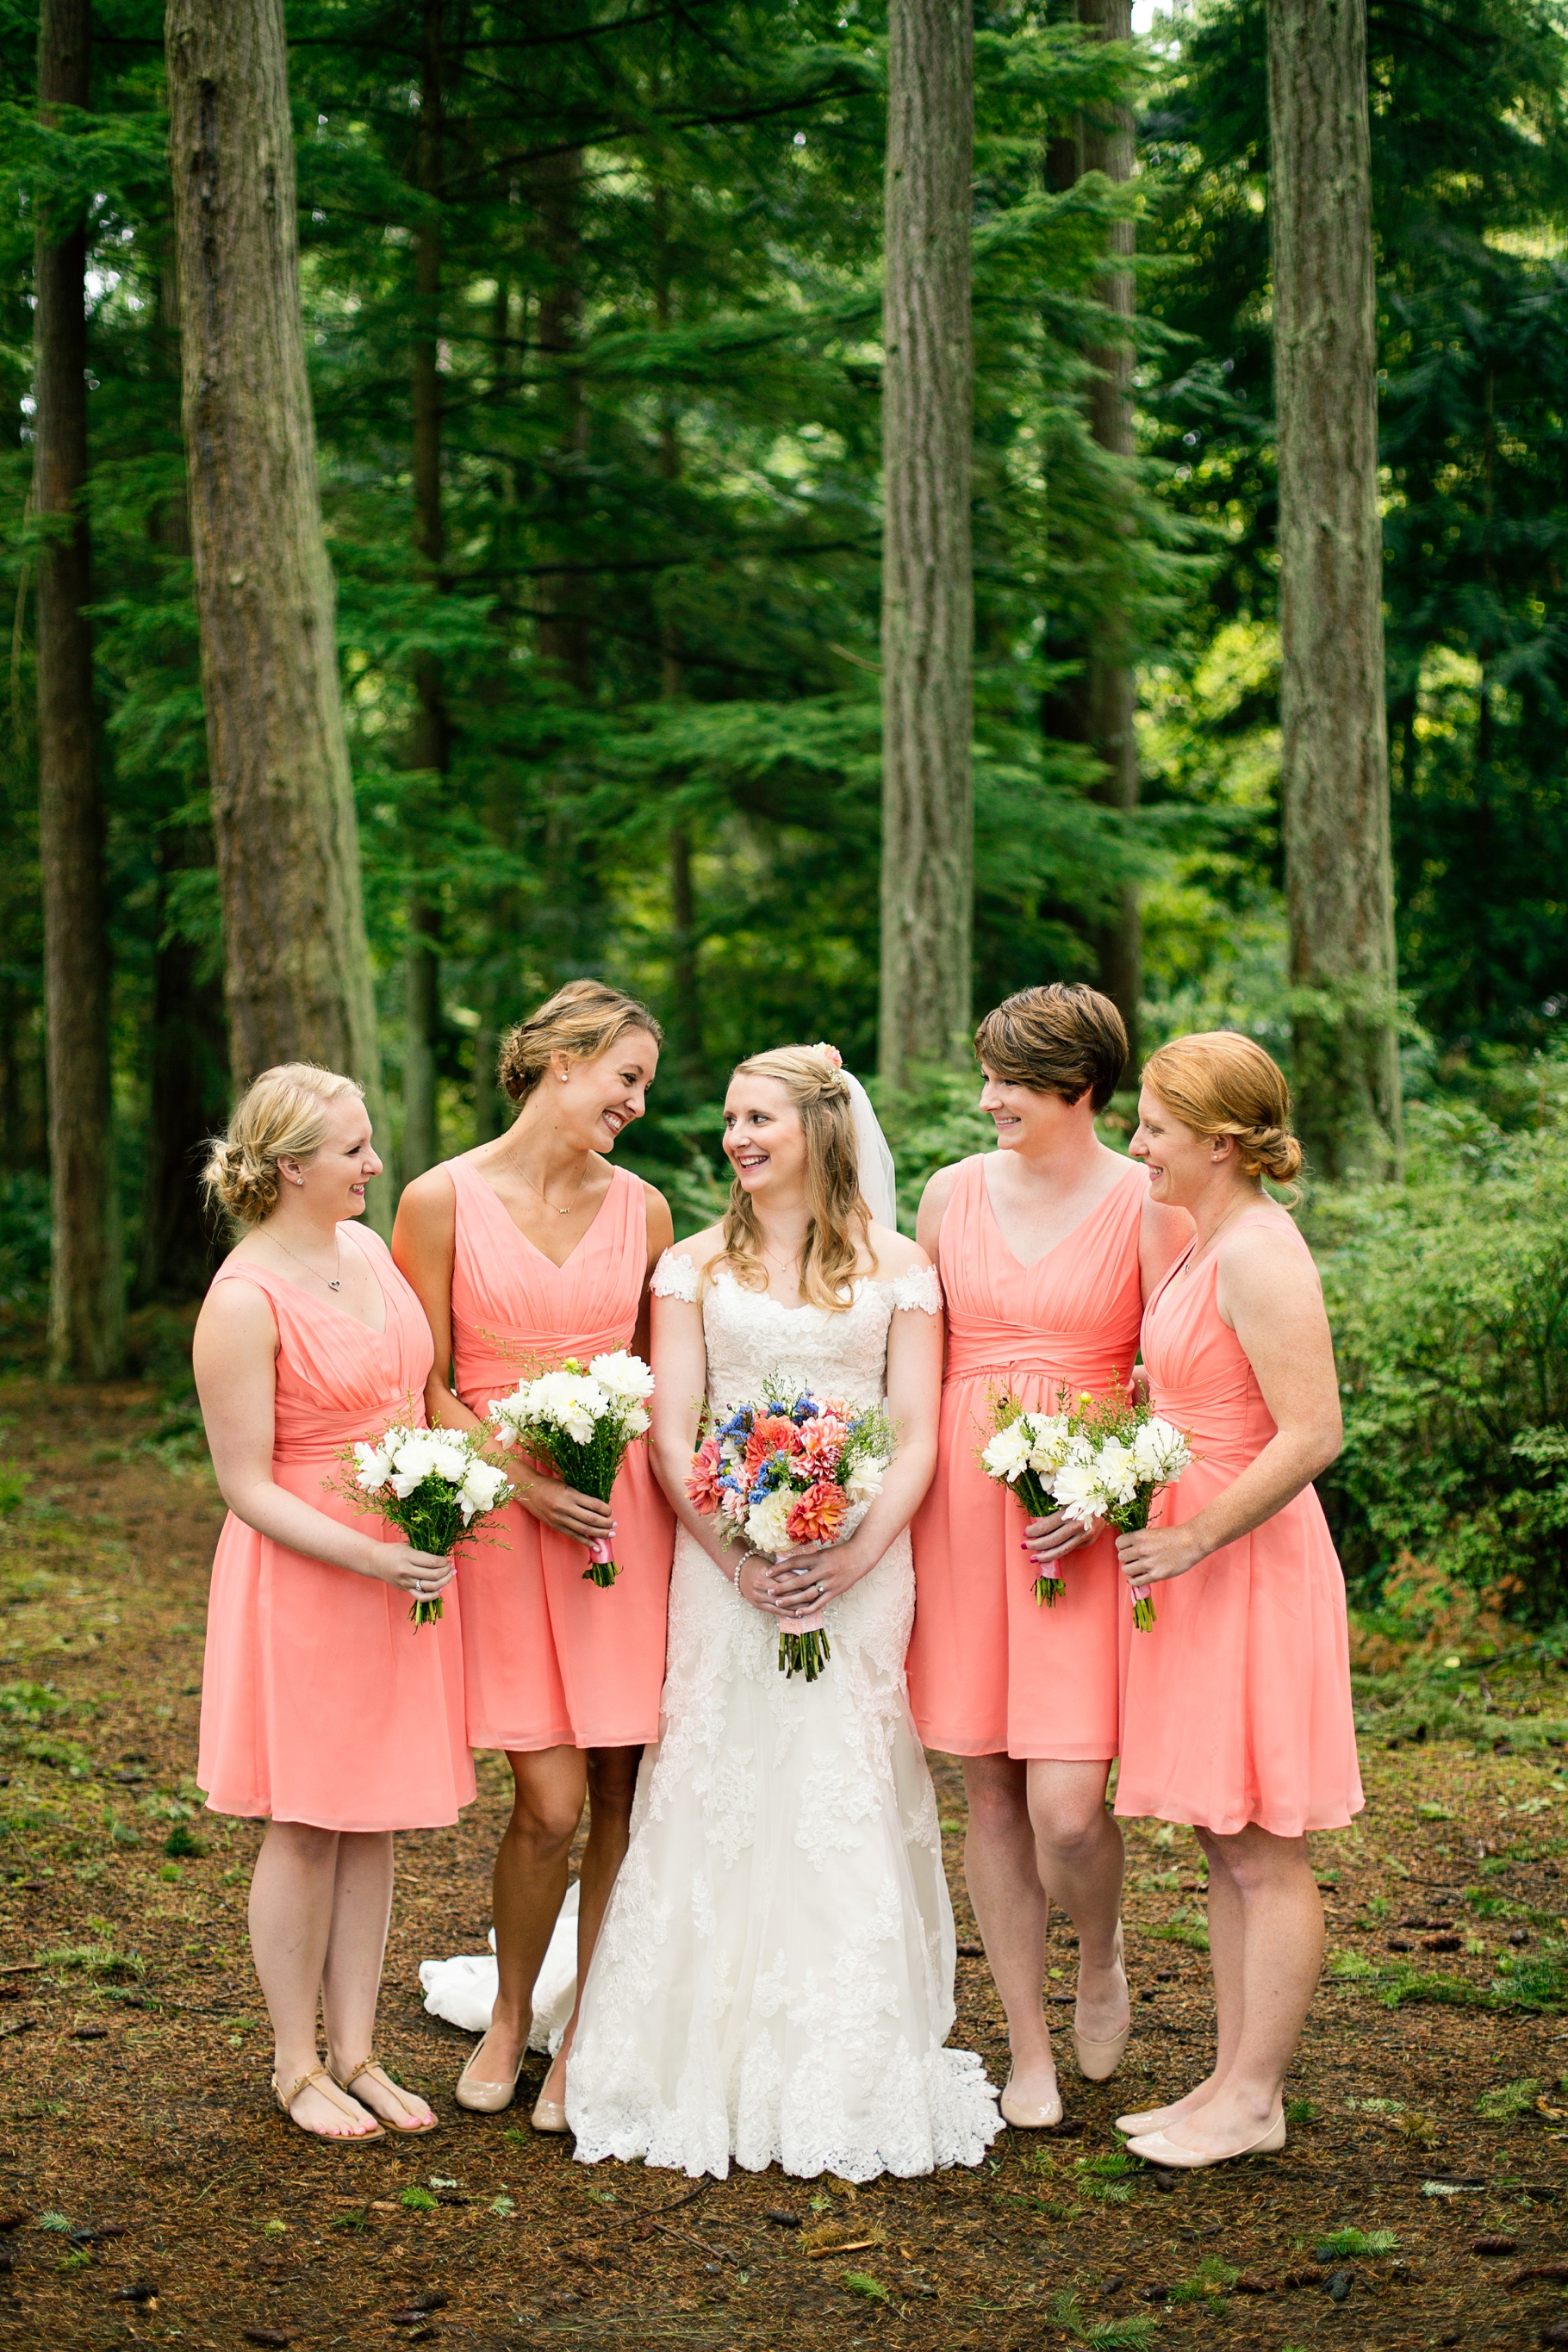 13-Bridesmaid-Portraits-Bridal-Bouquet-Flowers-Dahlias-Bride-wooded-bluff-olympic-mountains-log-cabin-Kitsap-Memorial-State-Park-Forest-Northwest-Photographer-Seattle-Wedding-Photography-by-Betty-Elaine